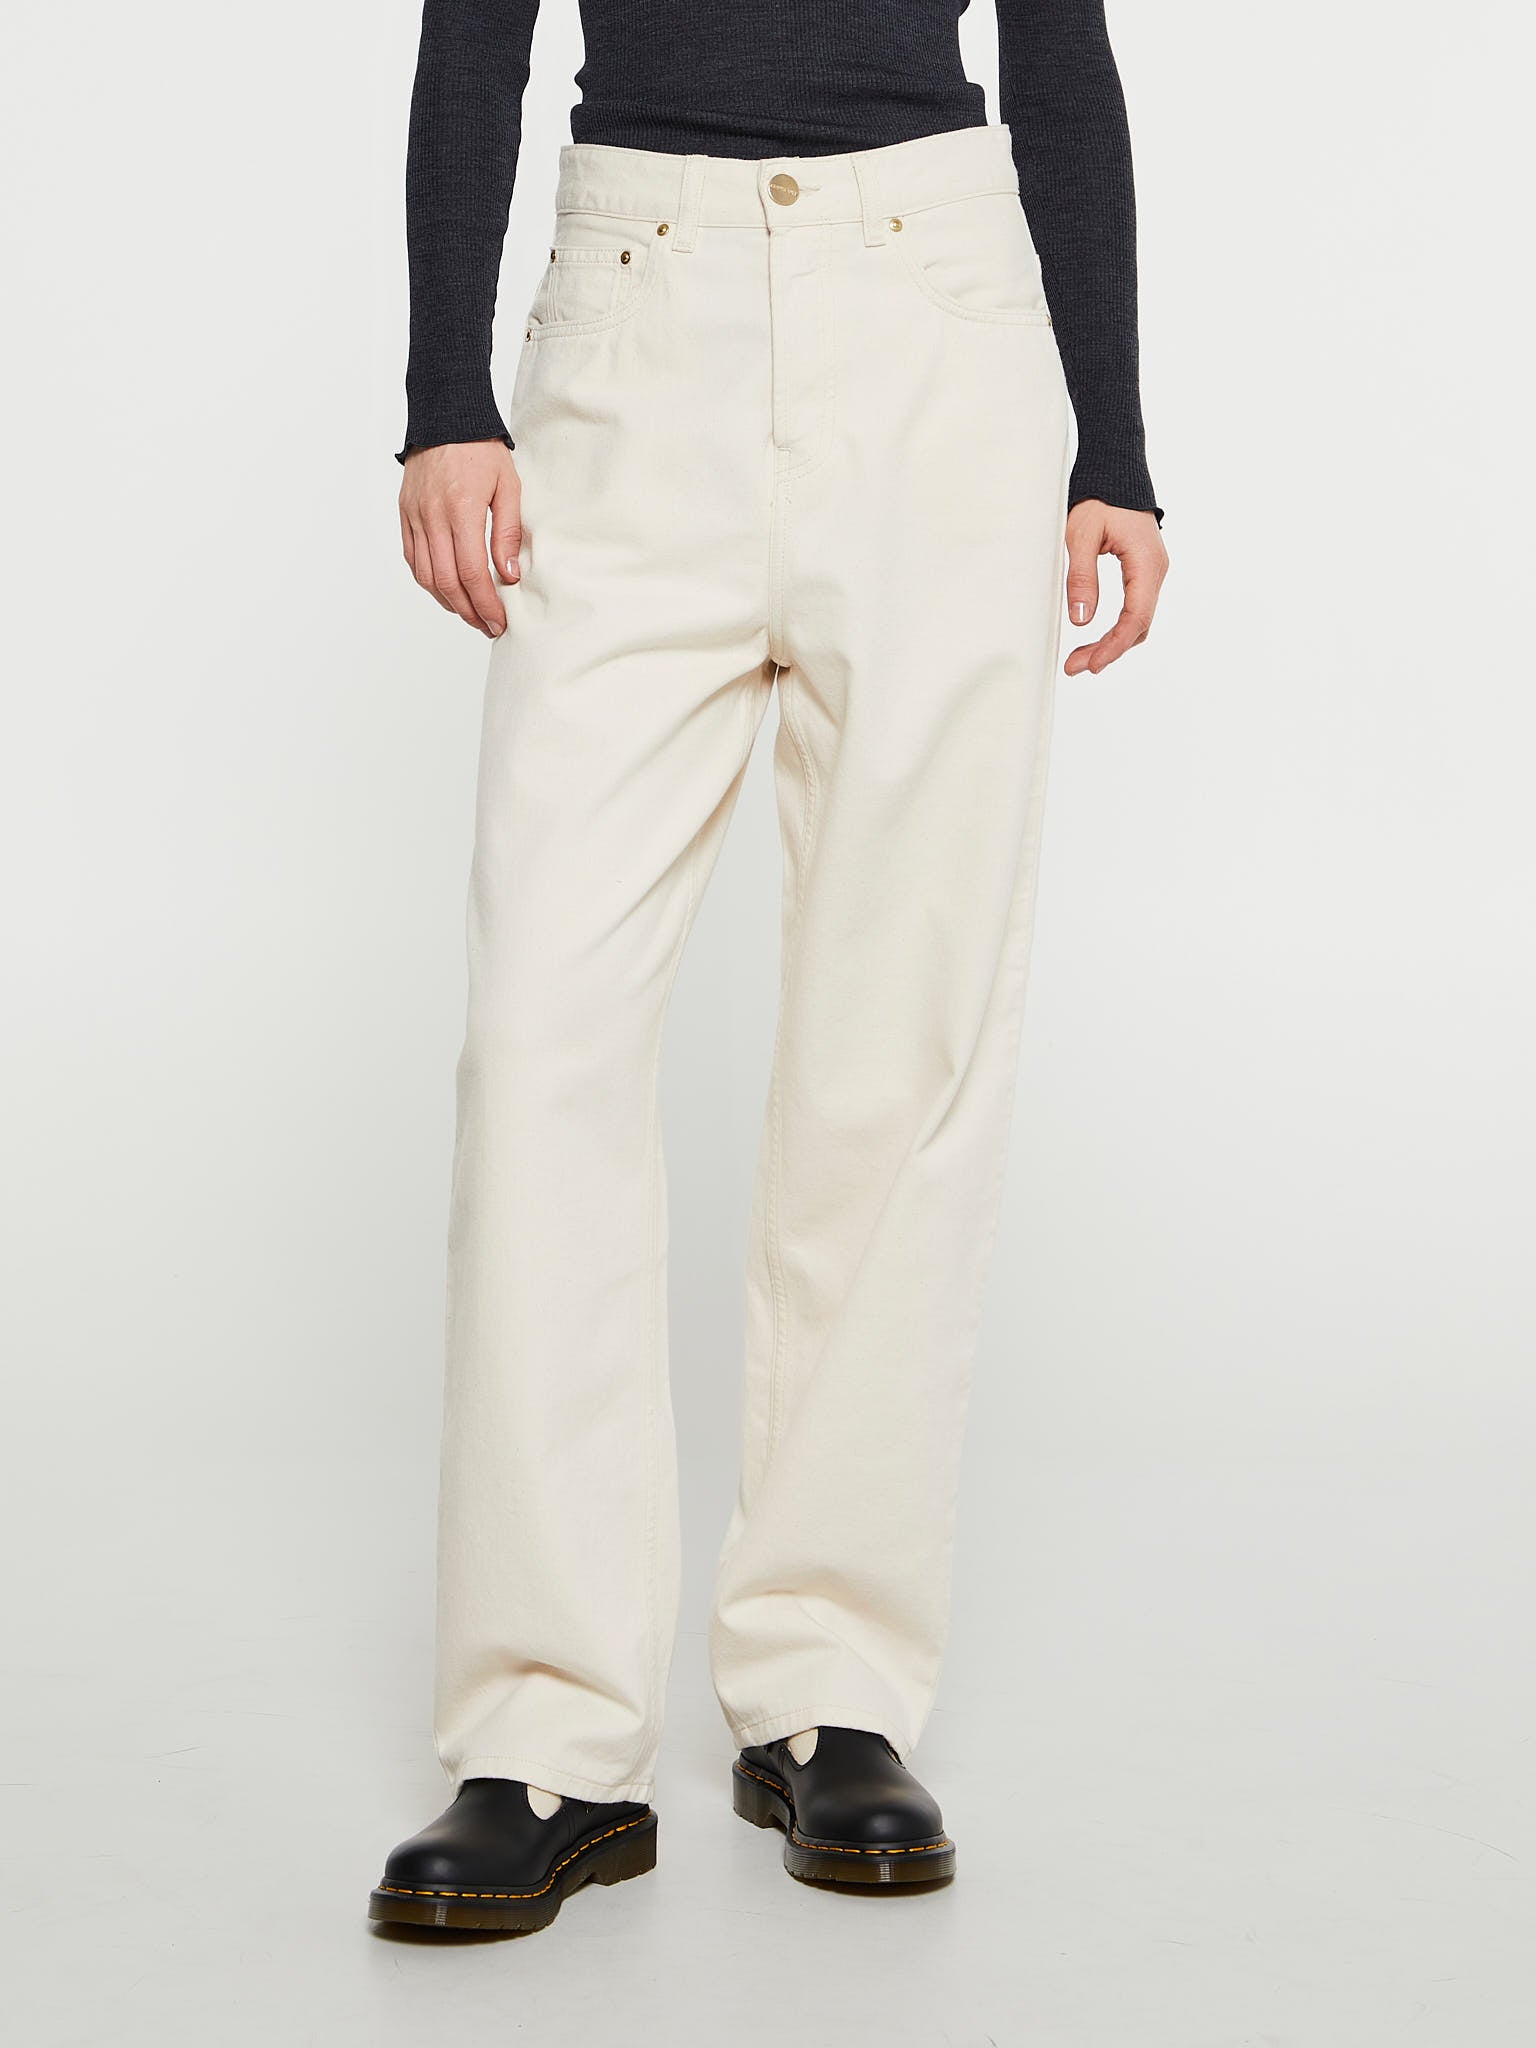 Carhartt - Women's Derby Pant in Natural Rinsed